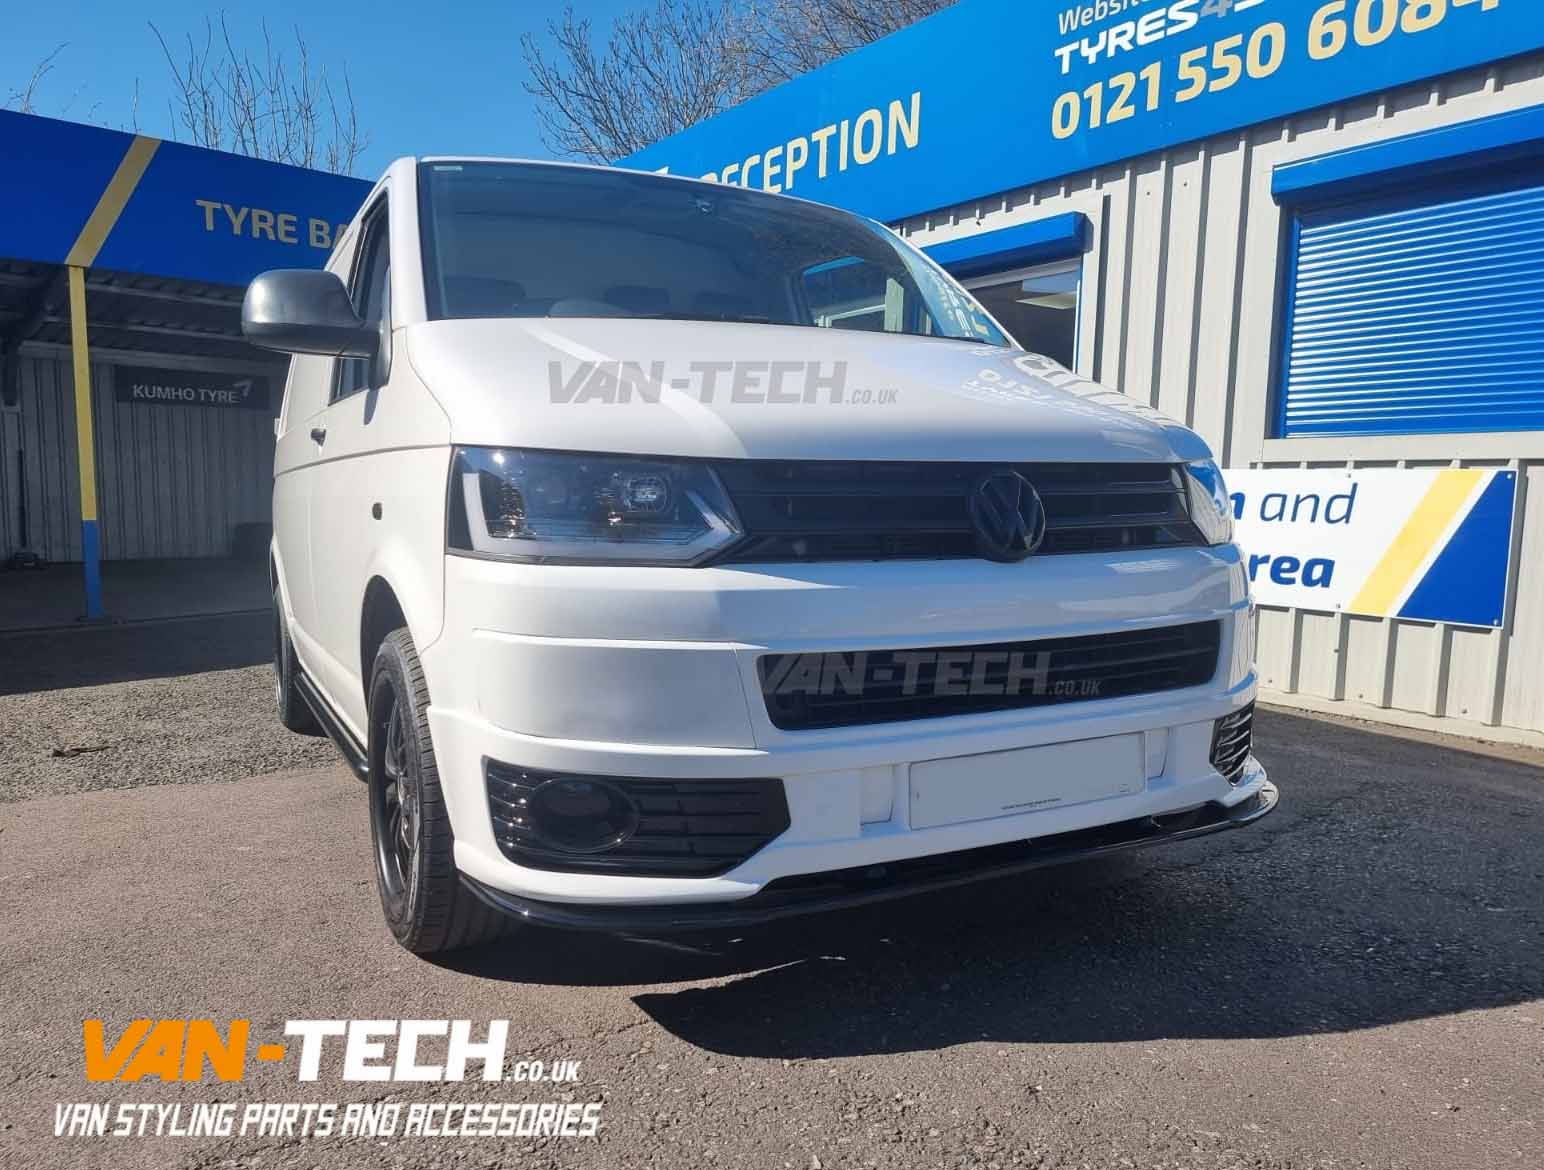 VW Transporter T5.1 parts fitted by Van-Tech